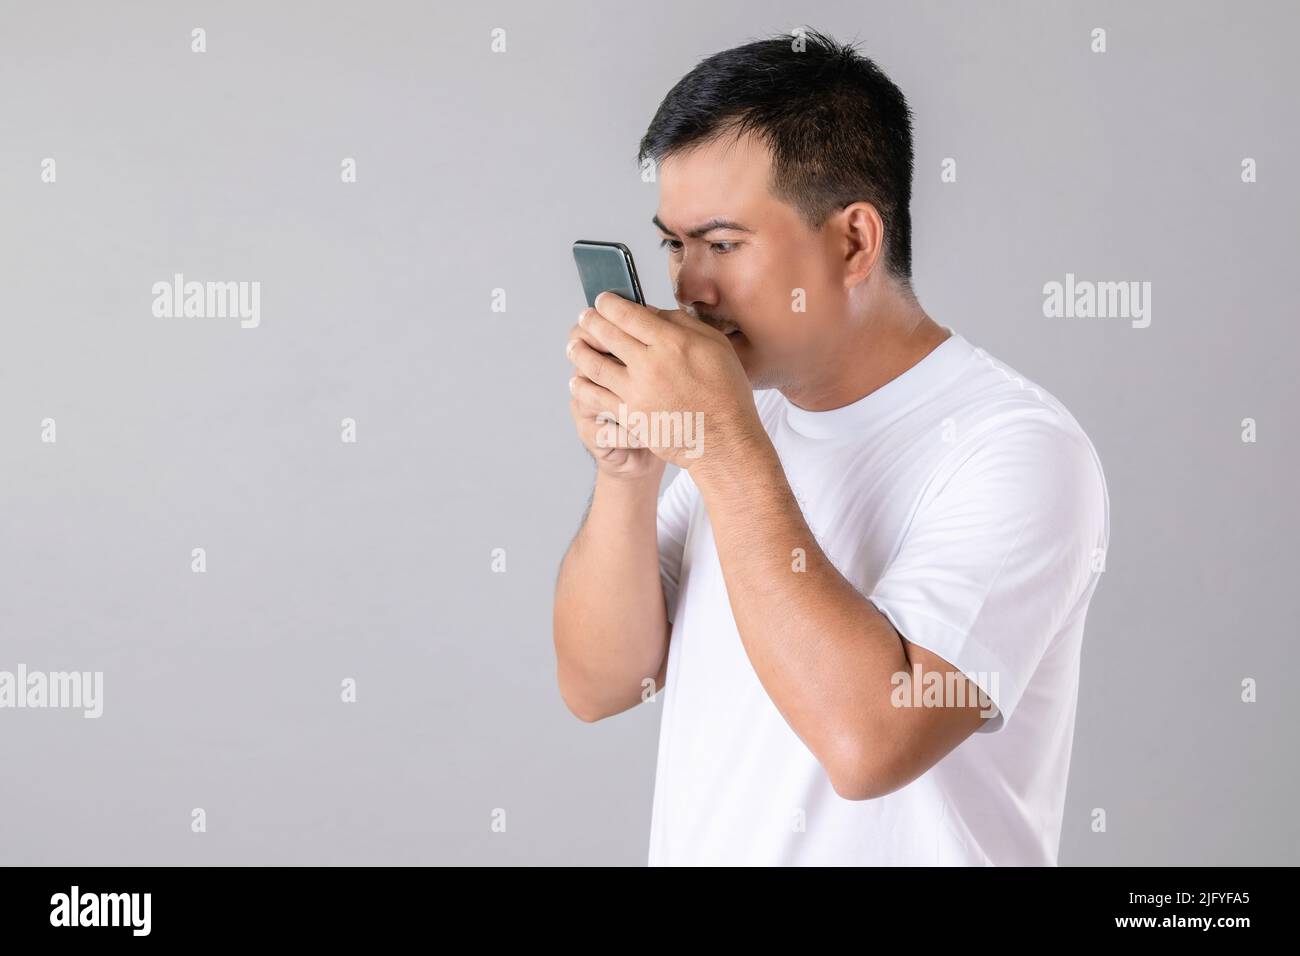 Short or long sighted concept : Man trying to look closer on smarthphone in studio shot on grey background Stock Photo